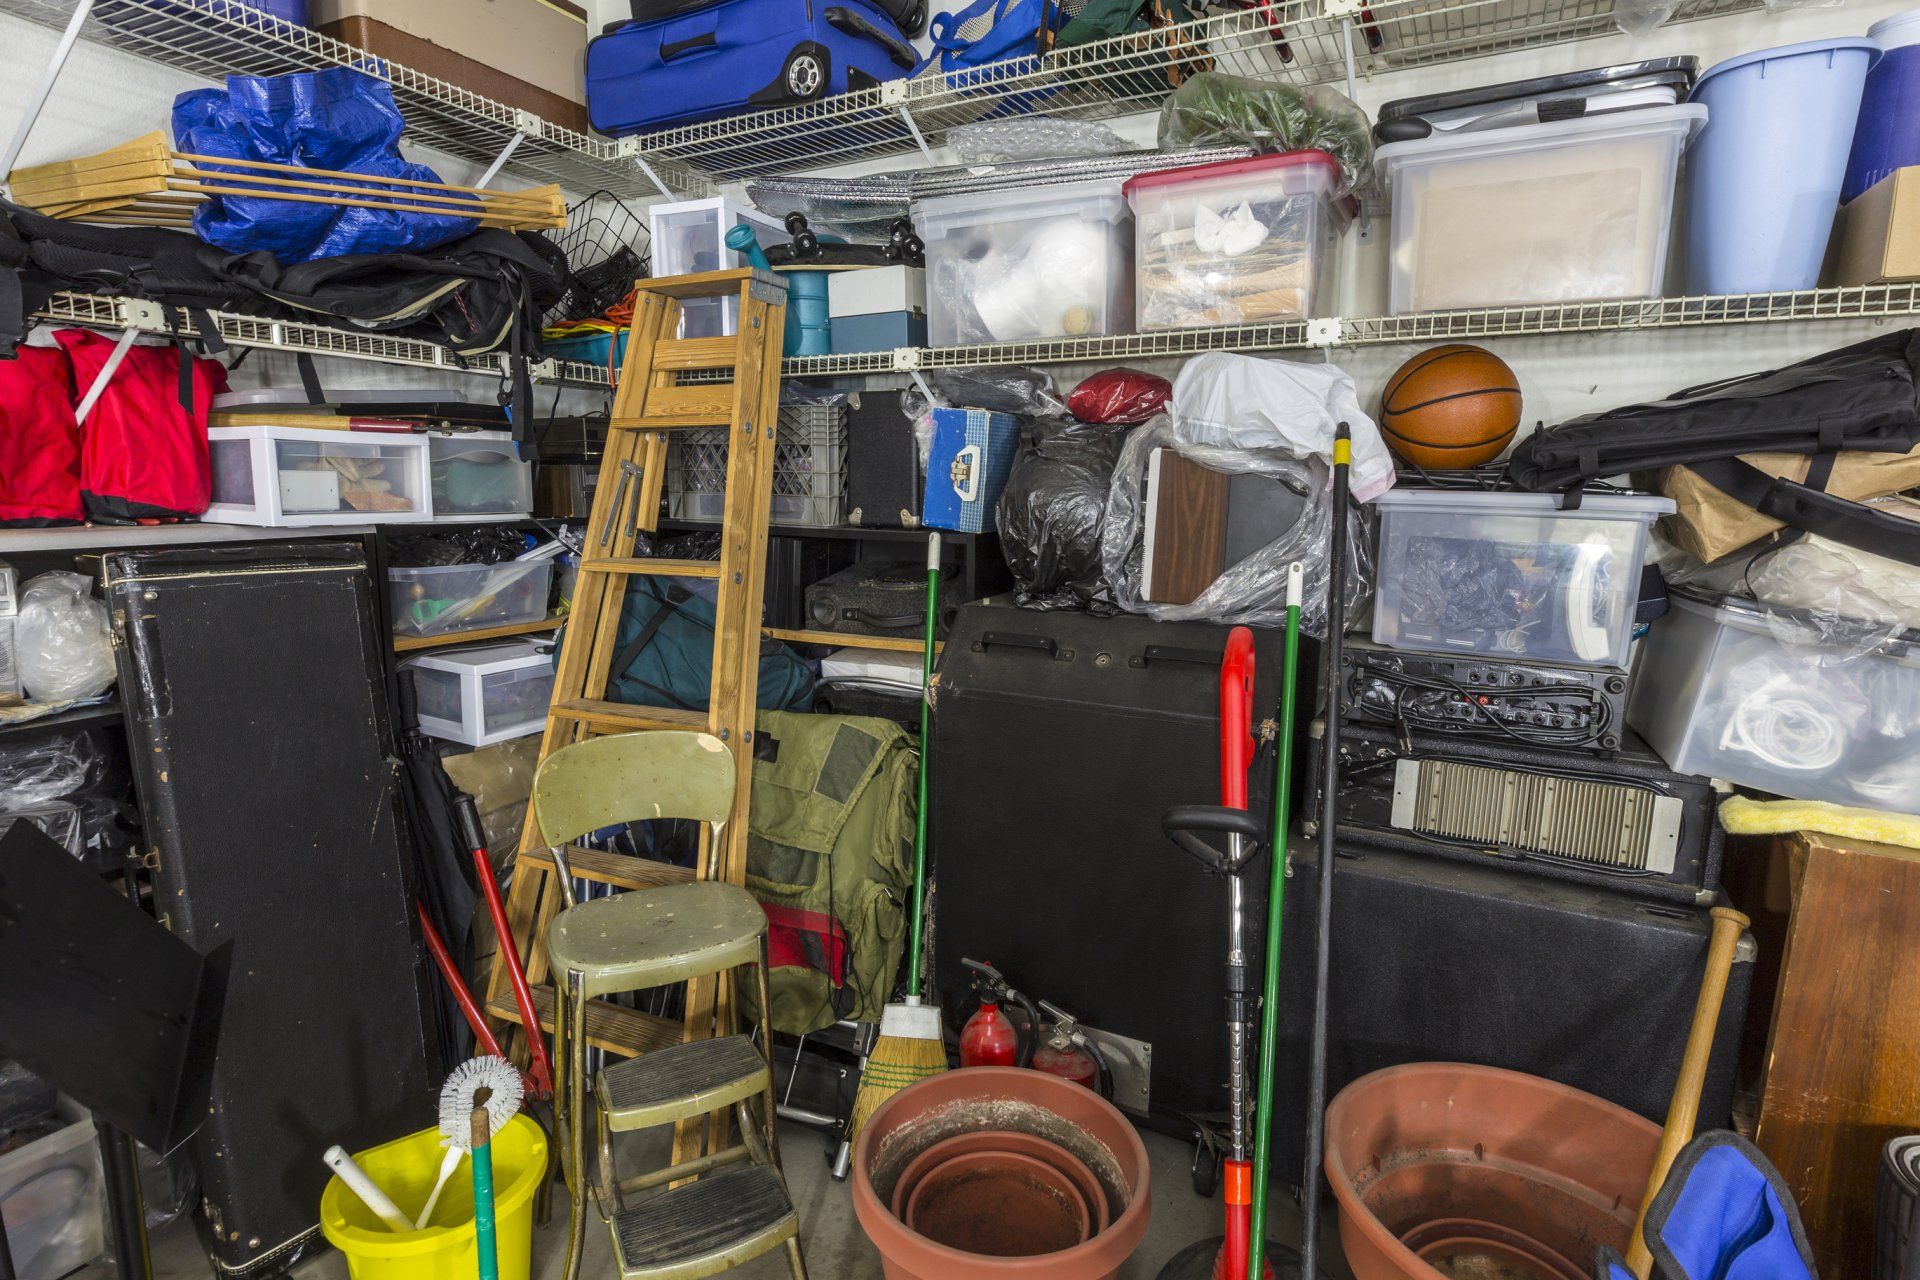 messy cluttered basement or garage